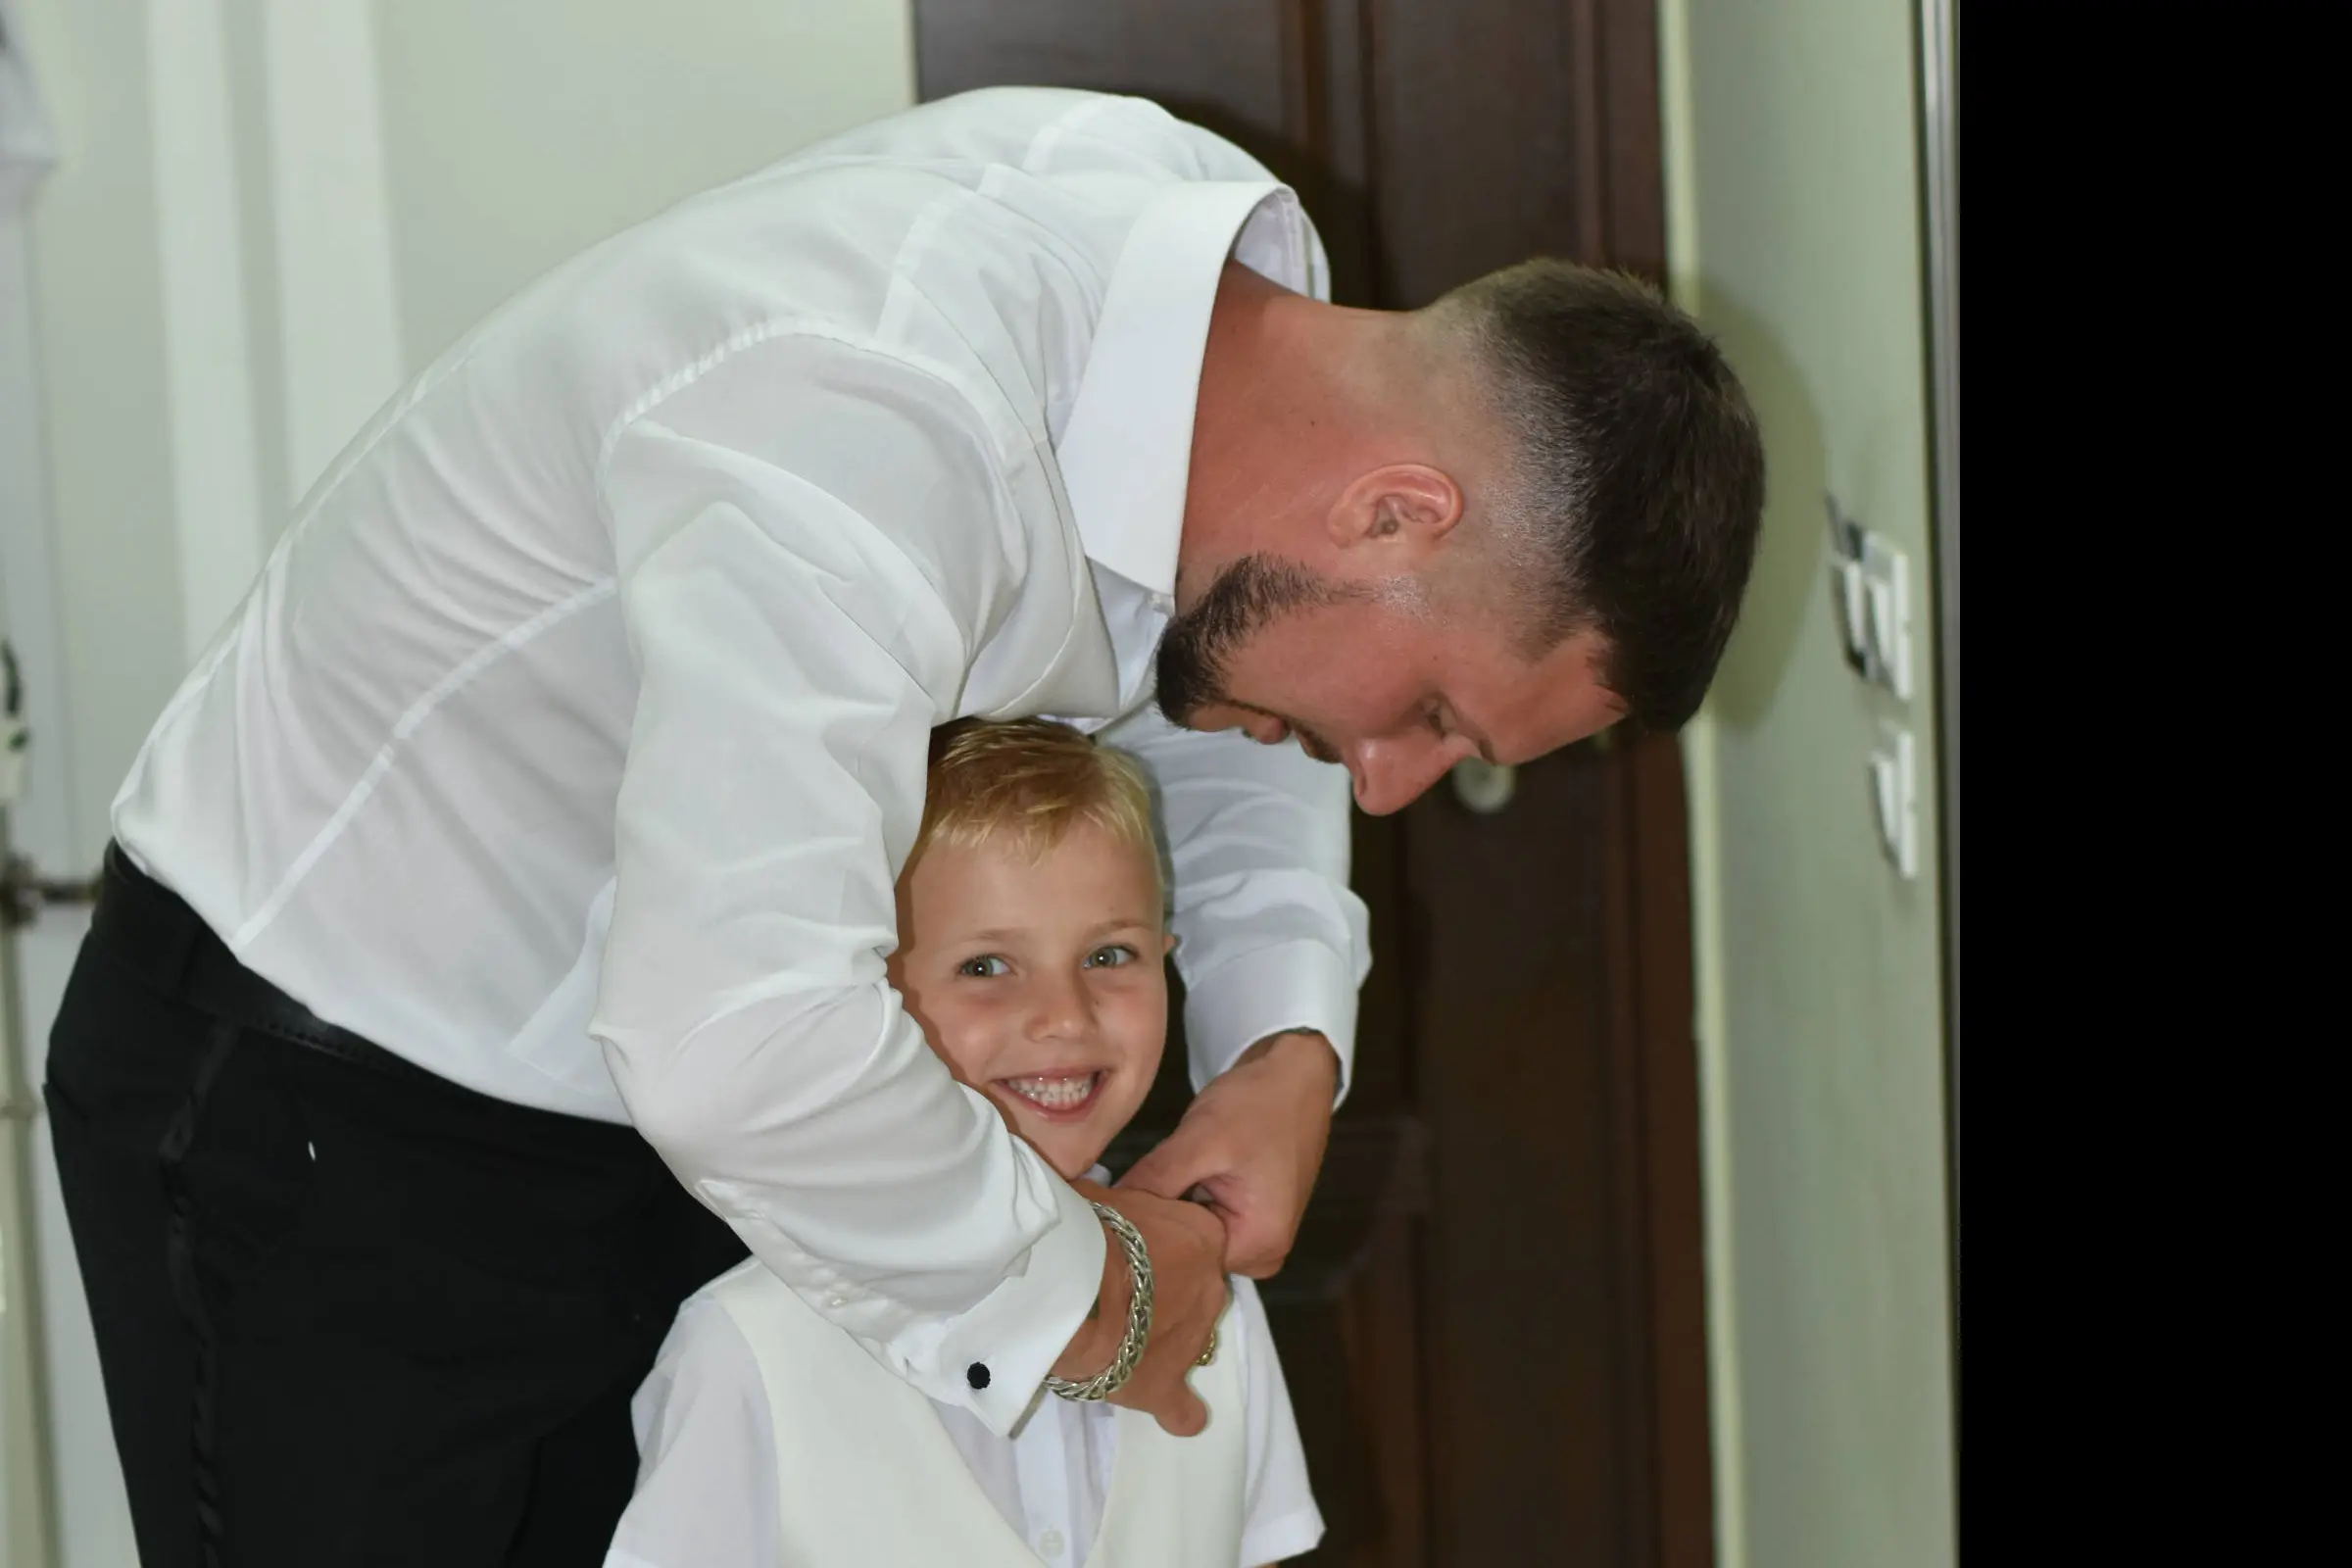 fater sorting his son shirt button at his wedding